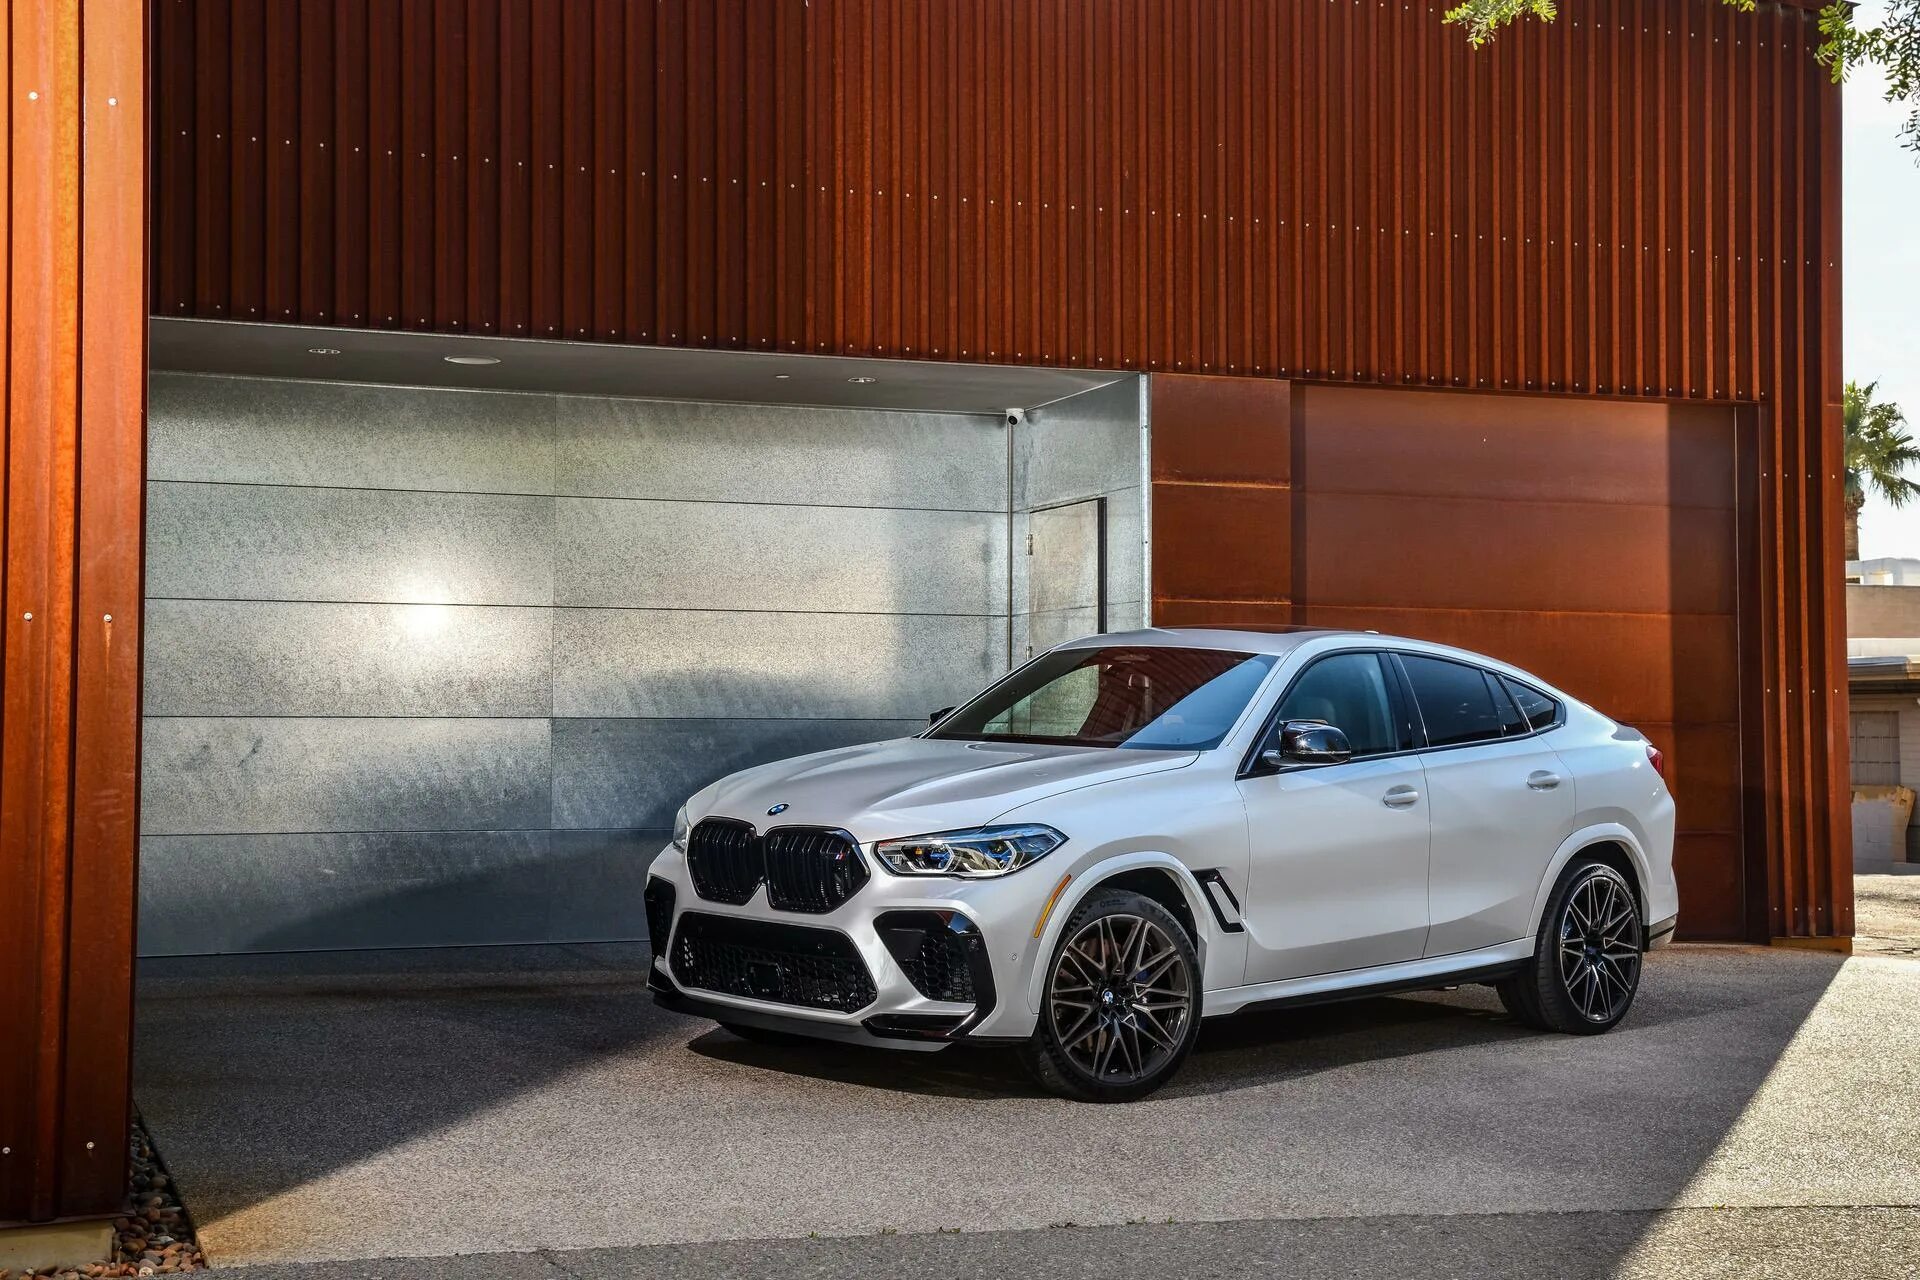 X6 competition